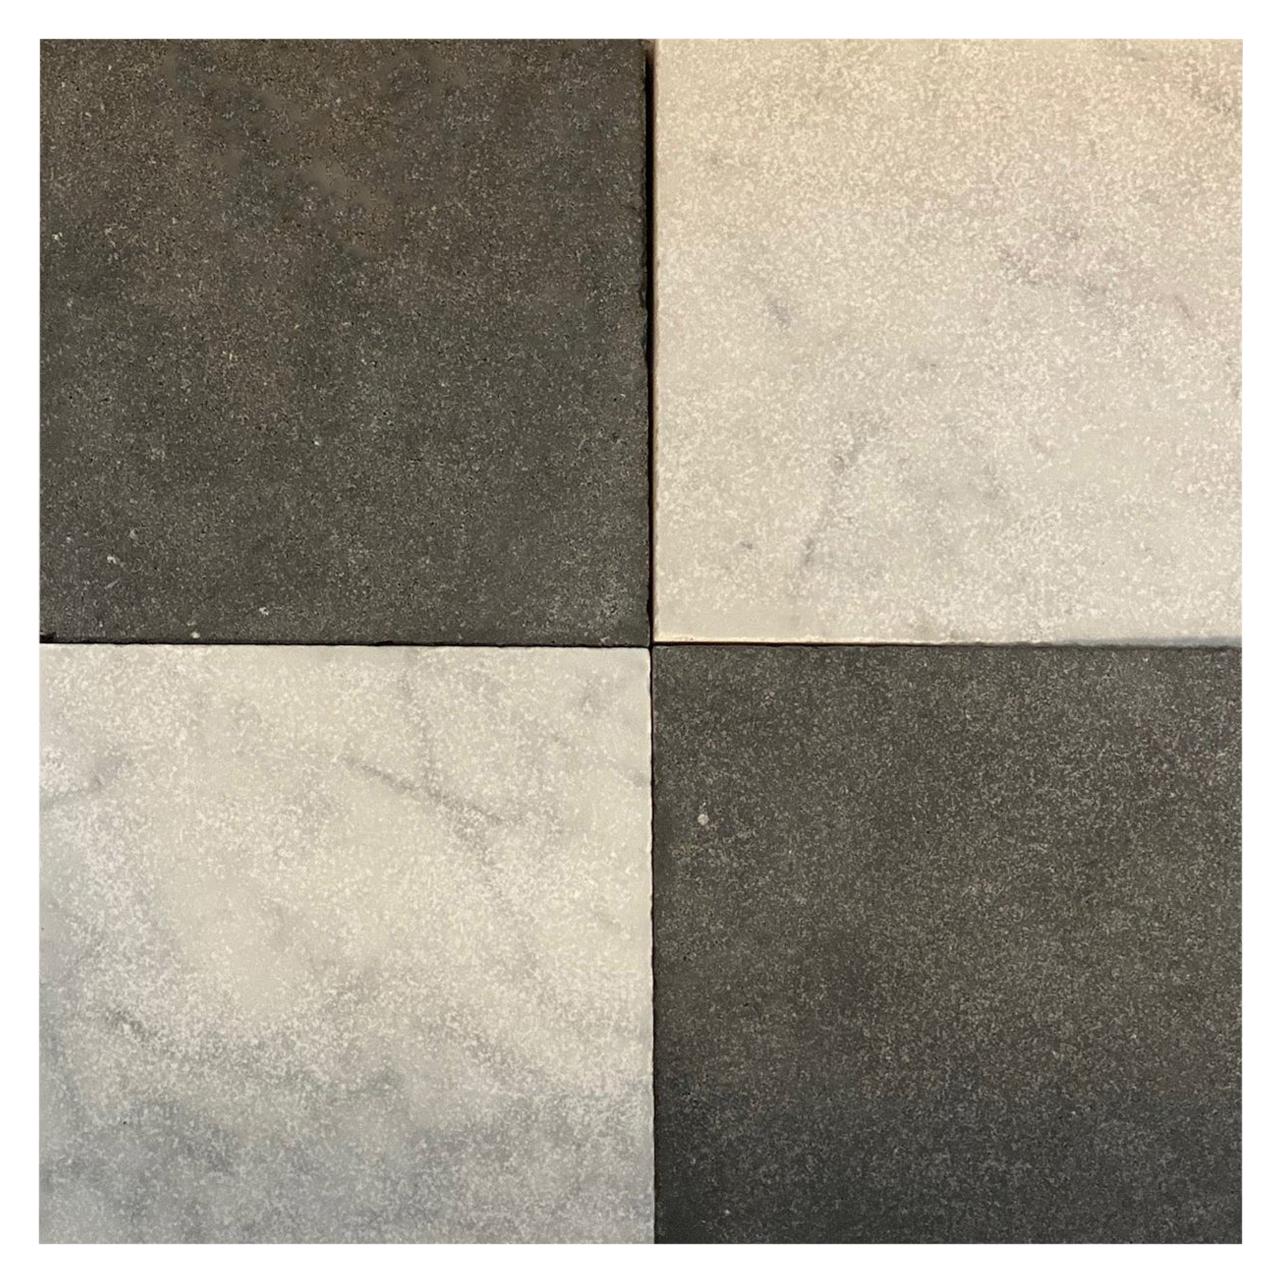 Black and White Marble Checkerboard Flooring For Sale